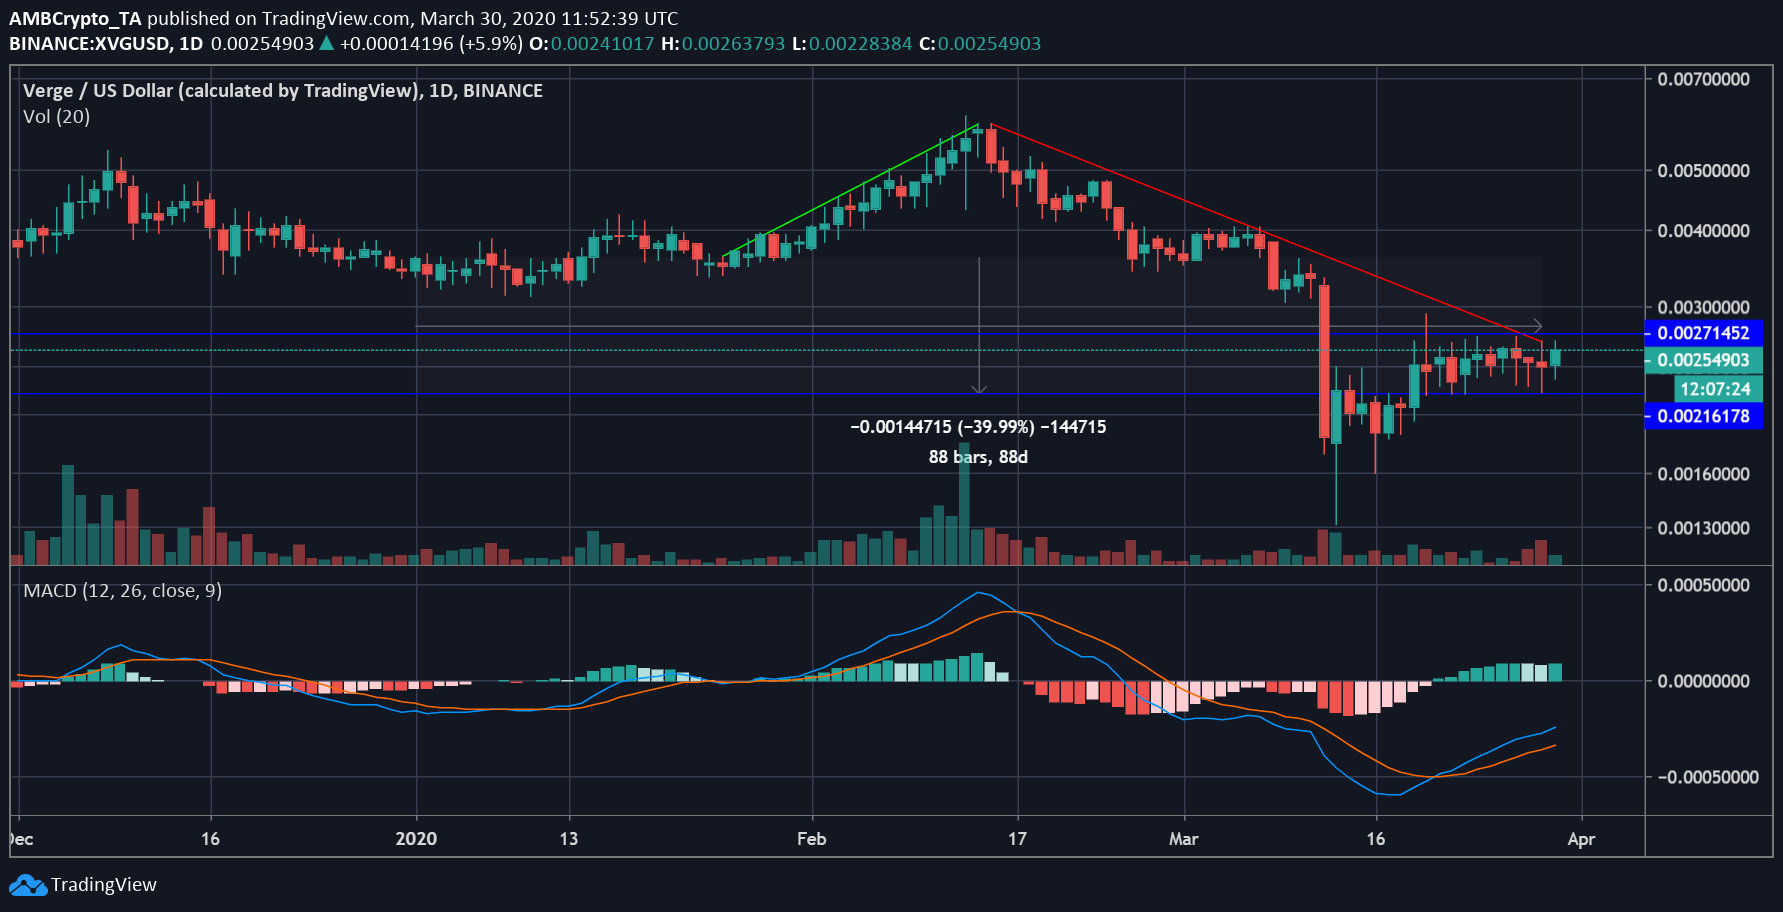 Source: XVG/USD on Trading View